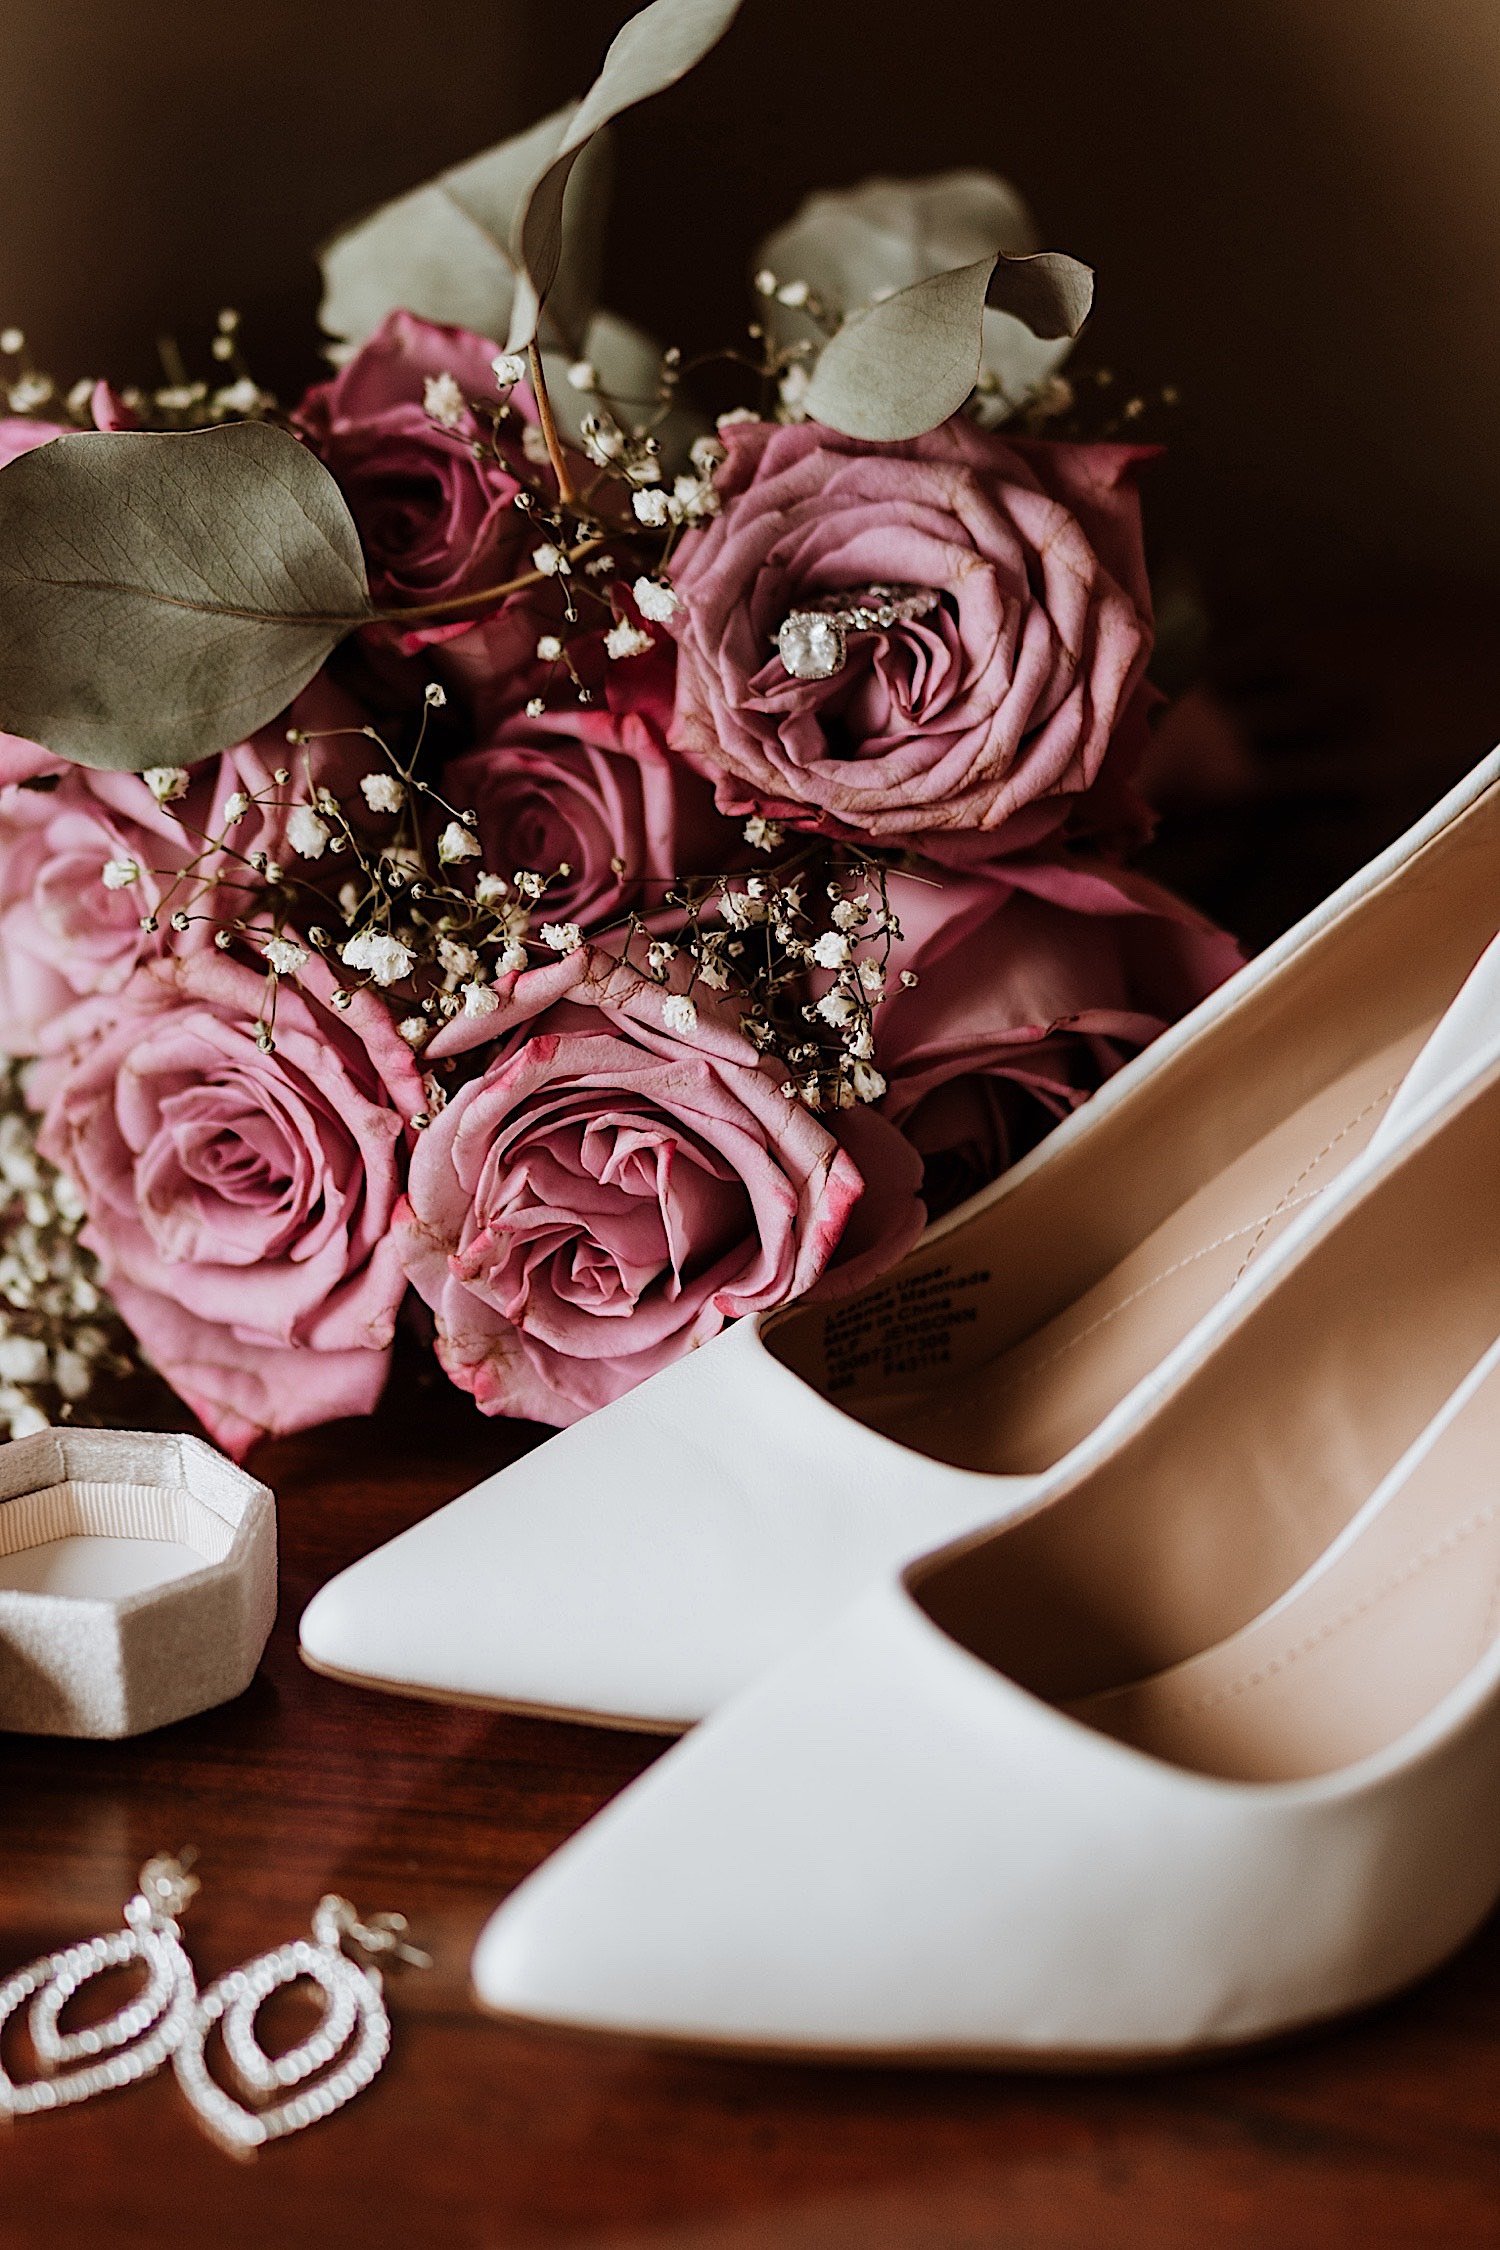 Shoes, earrings and flowers on a wood table